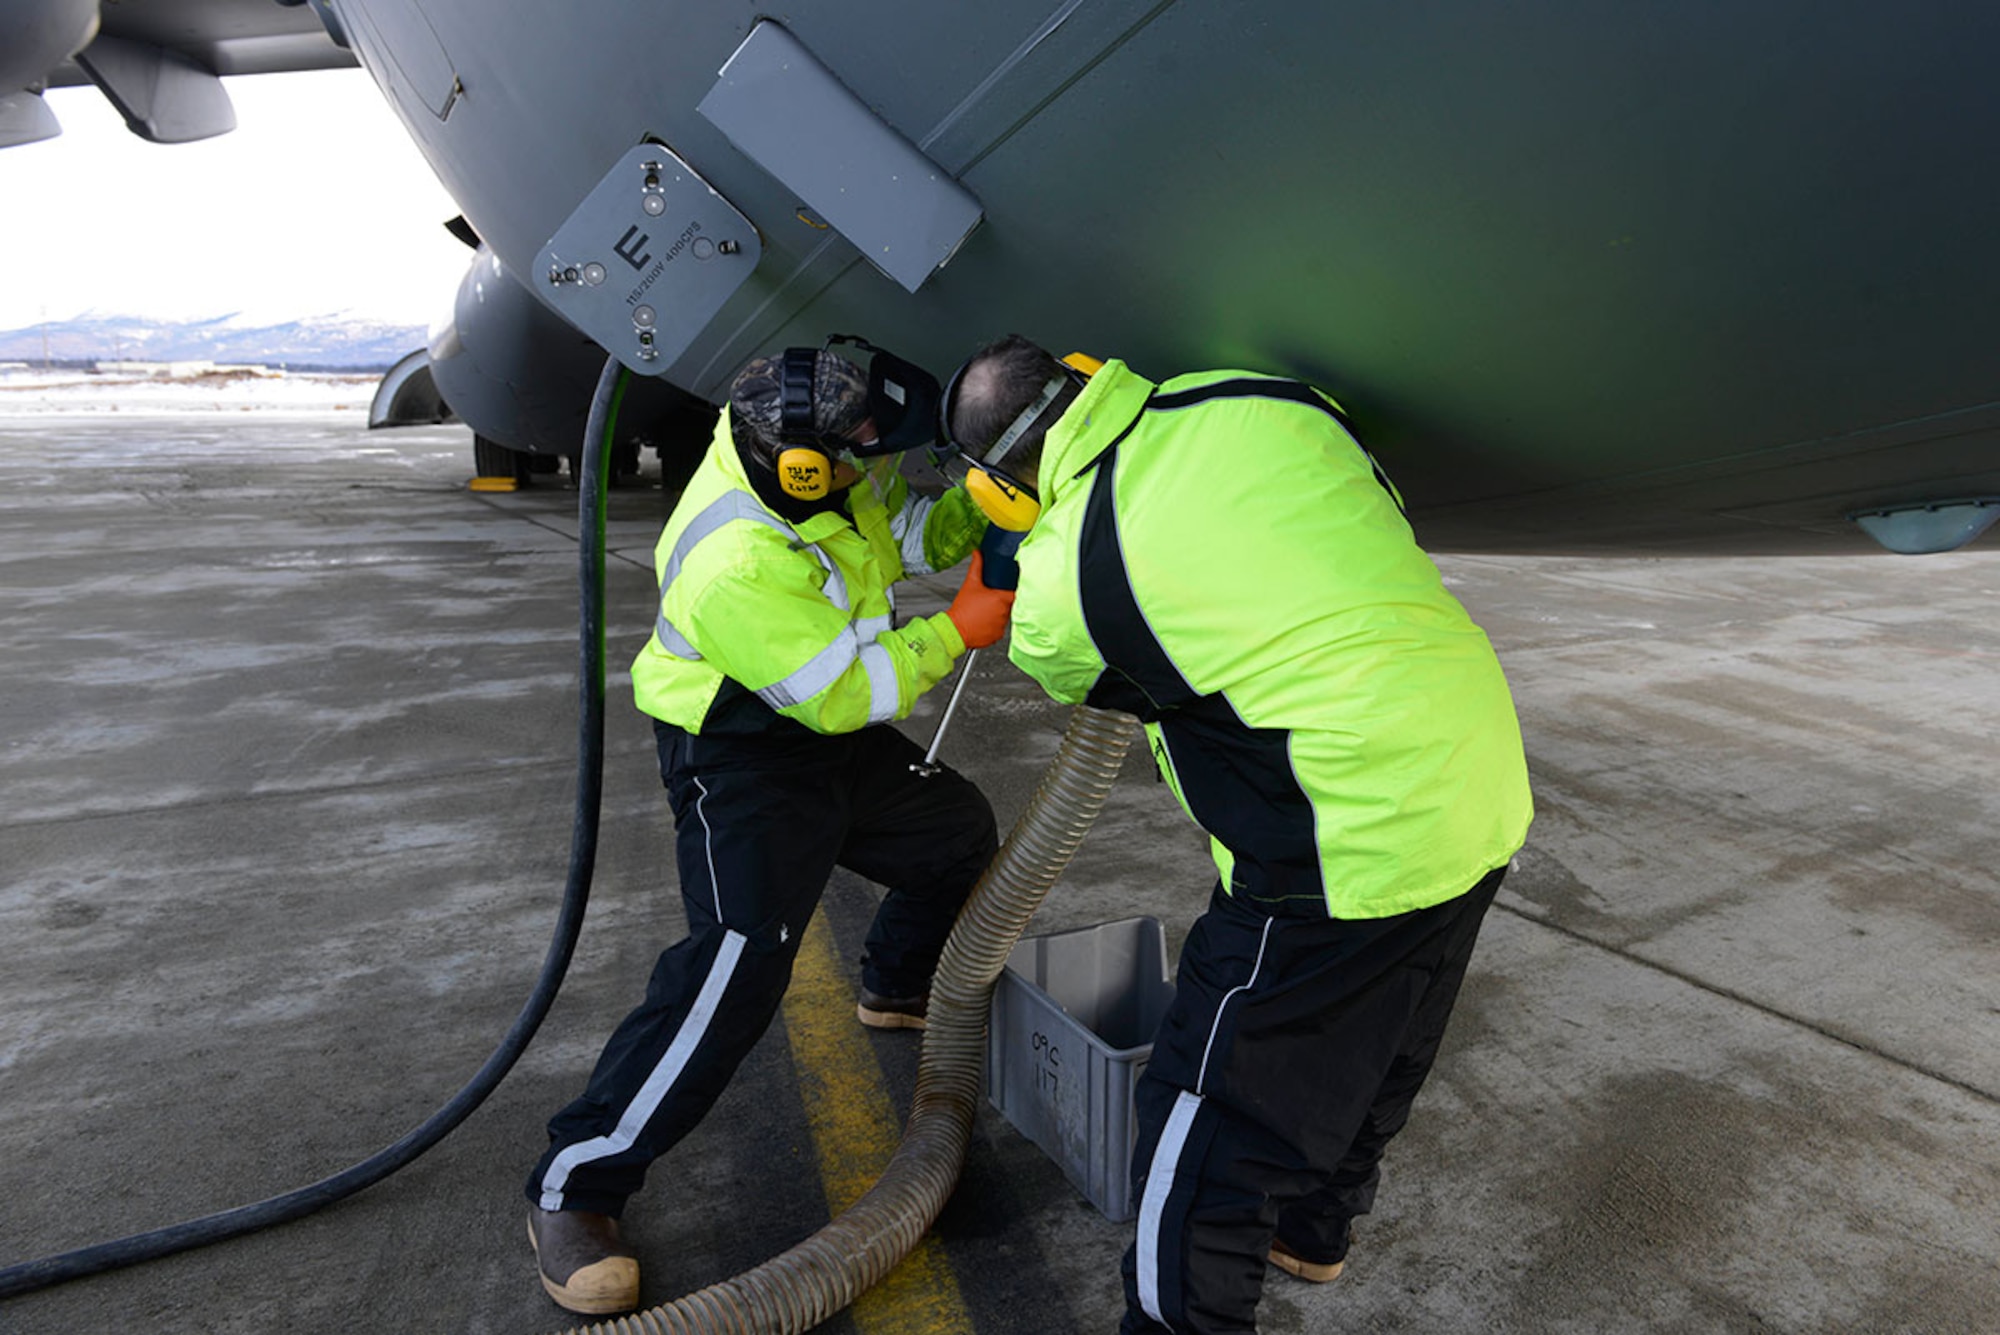 Jeffrey Zook, left, and Lewis Come, right, detach a drainage tube to a C-17 Globemaster III at Joint Base Elmendorf-Richardson, after removing the waste from the aircraft’s lavatory. Fleet services not only cleans and services all aircraft lavatories, but also removes trash on board and prepares all outbound aircraft with pillows, blankets and other necessary items. Zook is a fleet services vehicle operator and Come is the fleet services supervisor, both are with the 732nd Air Mobility Squadron. (U.S. Air Force photo by Airman Valerie Monroy)